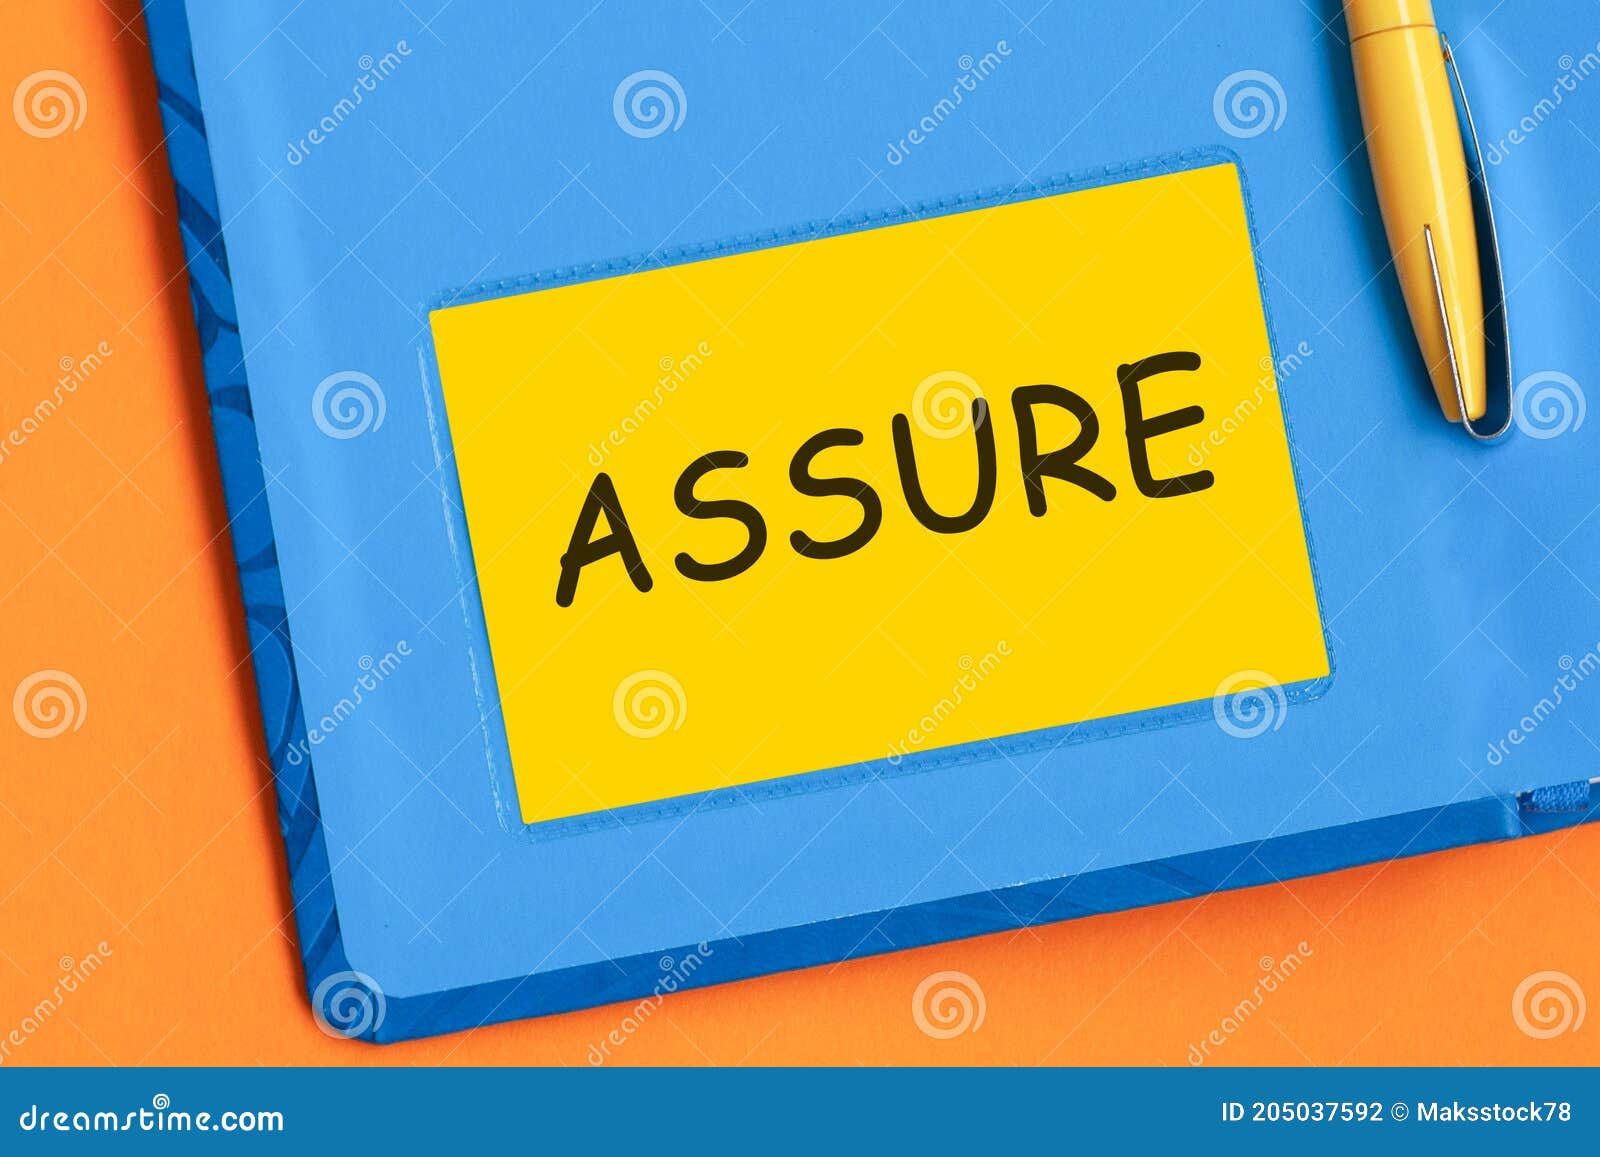 assure the word is written in black letters on the yellow paper for notes